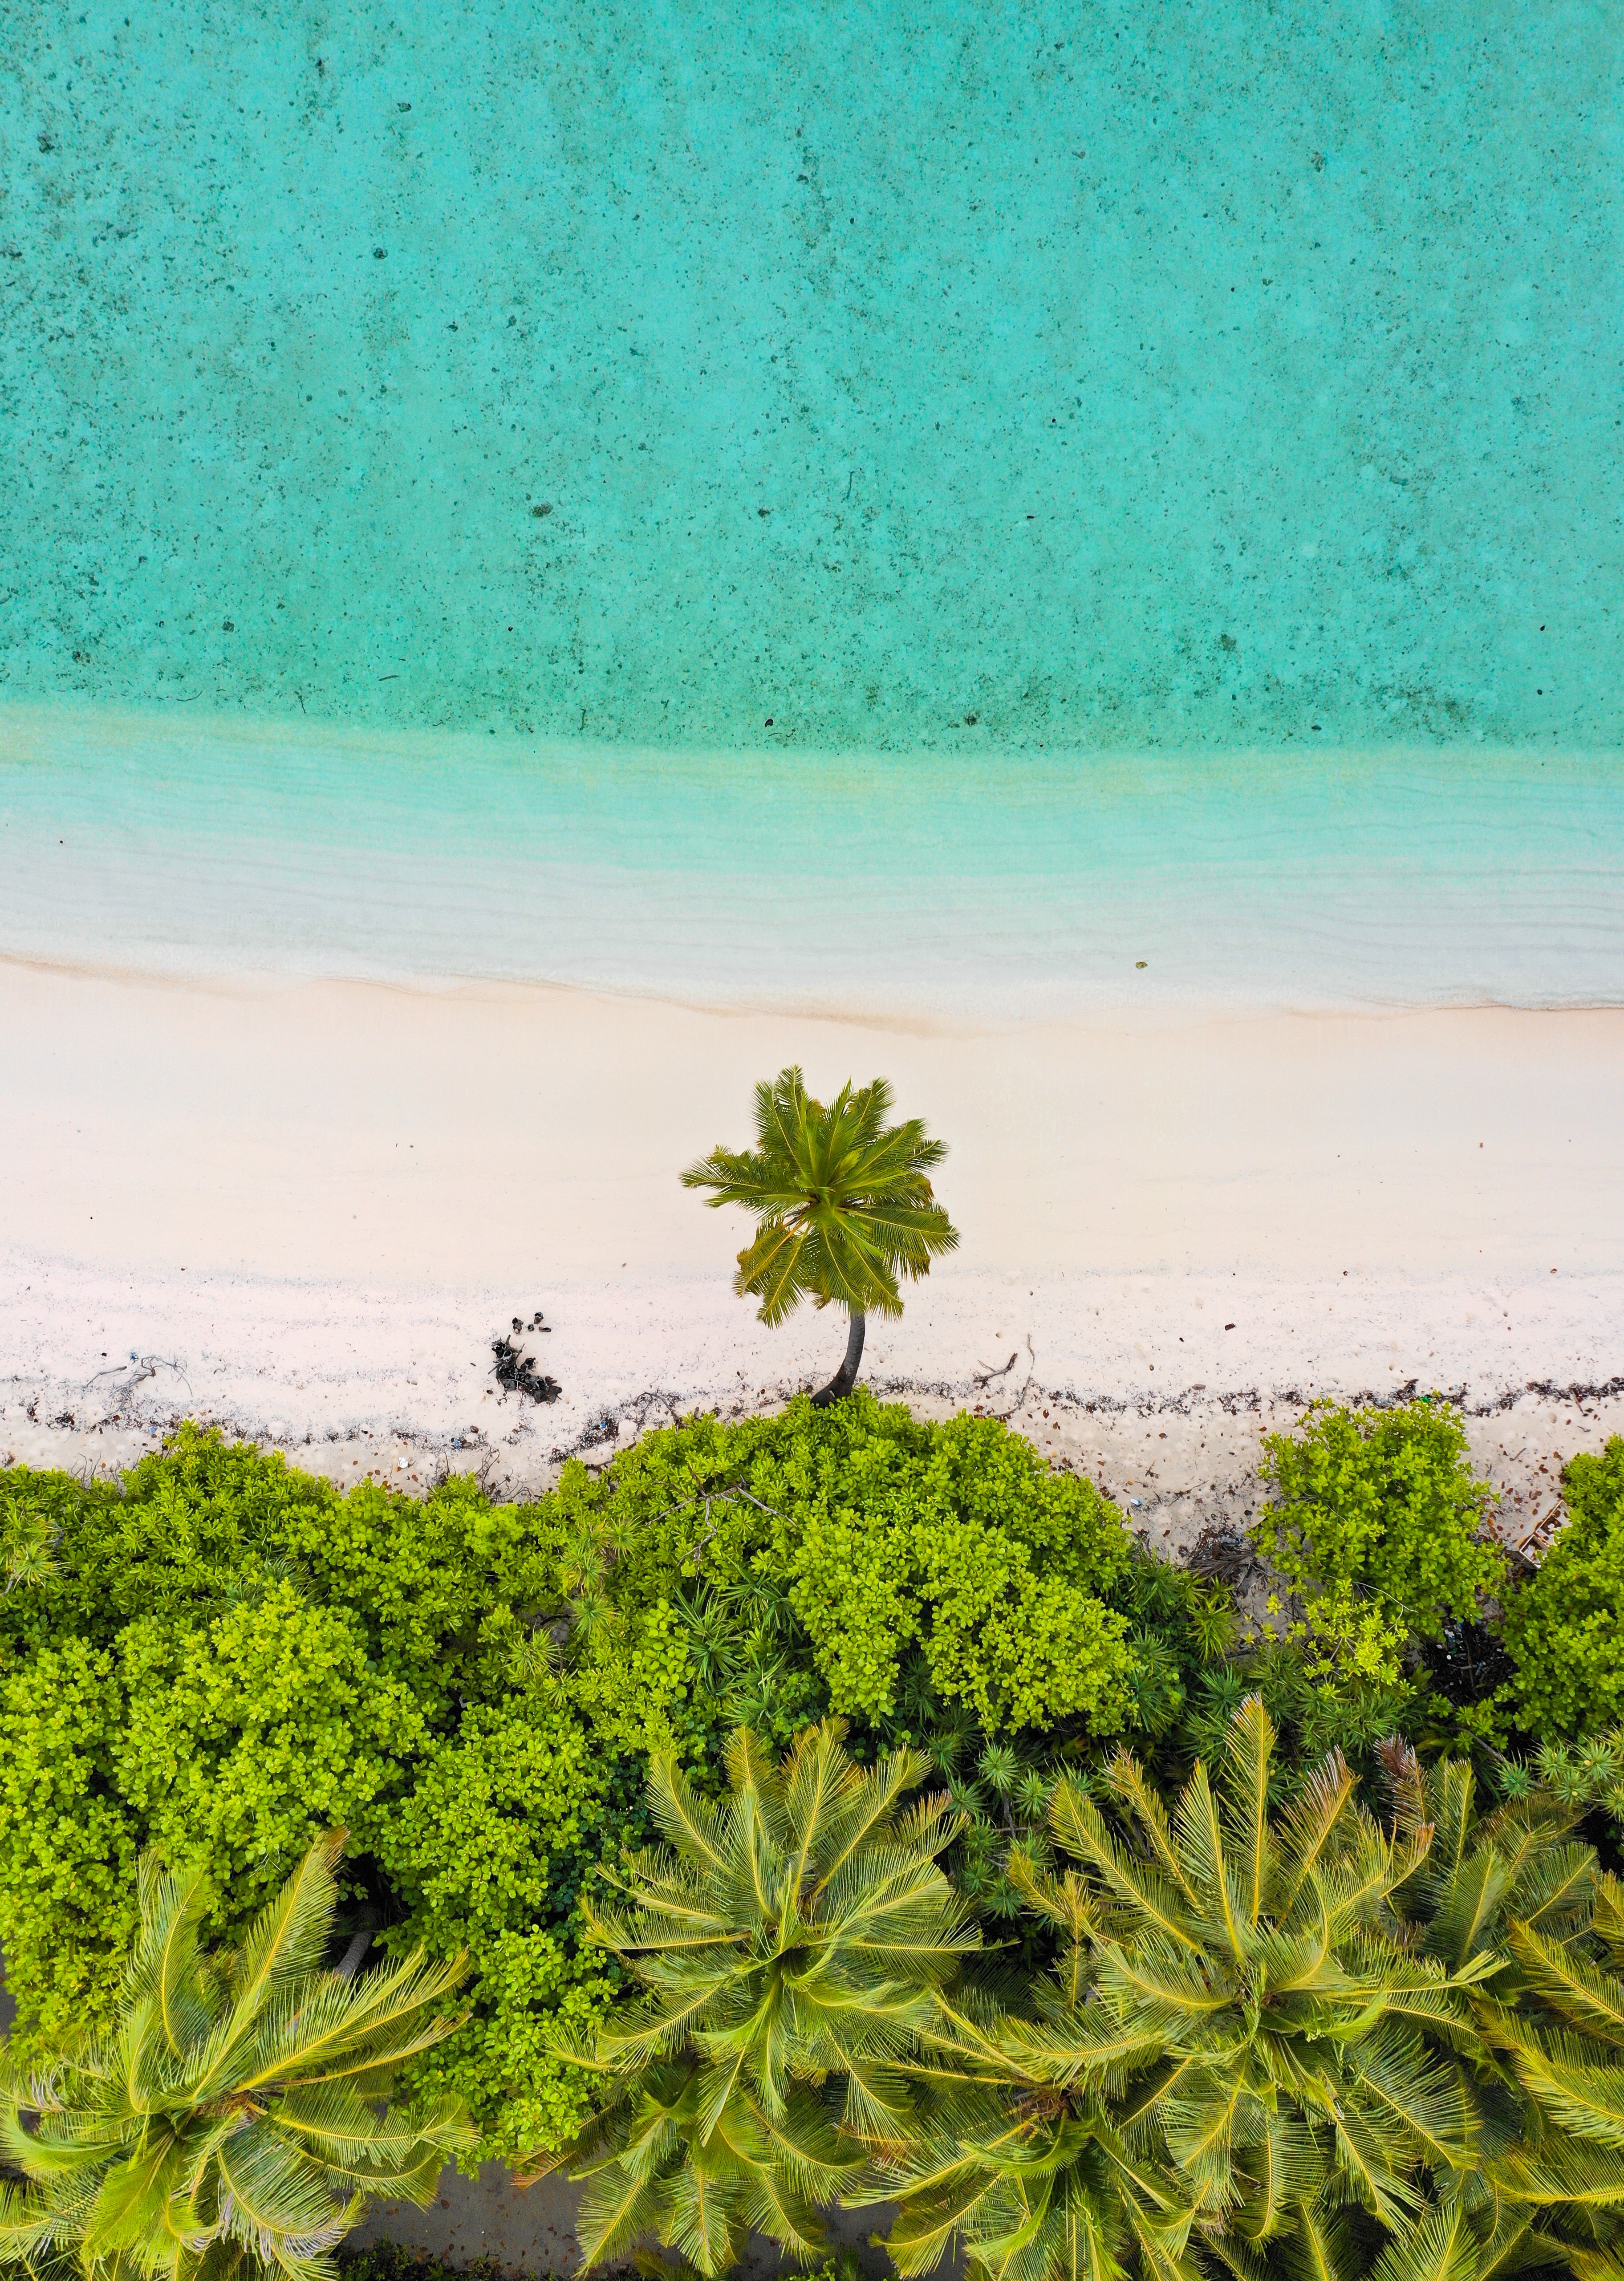 Cool Wallpapers nature, sea, beach, sand, palms, view from above